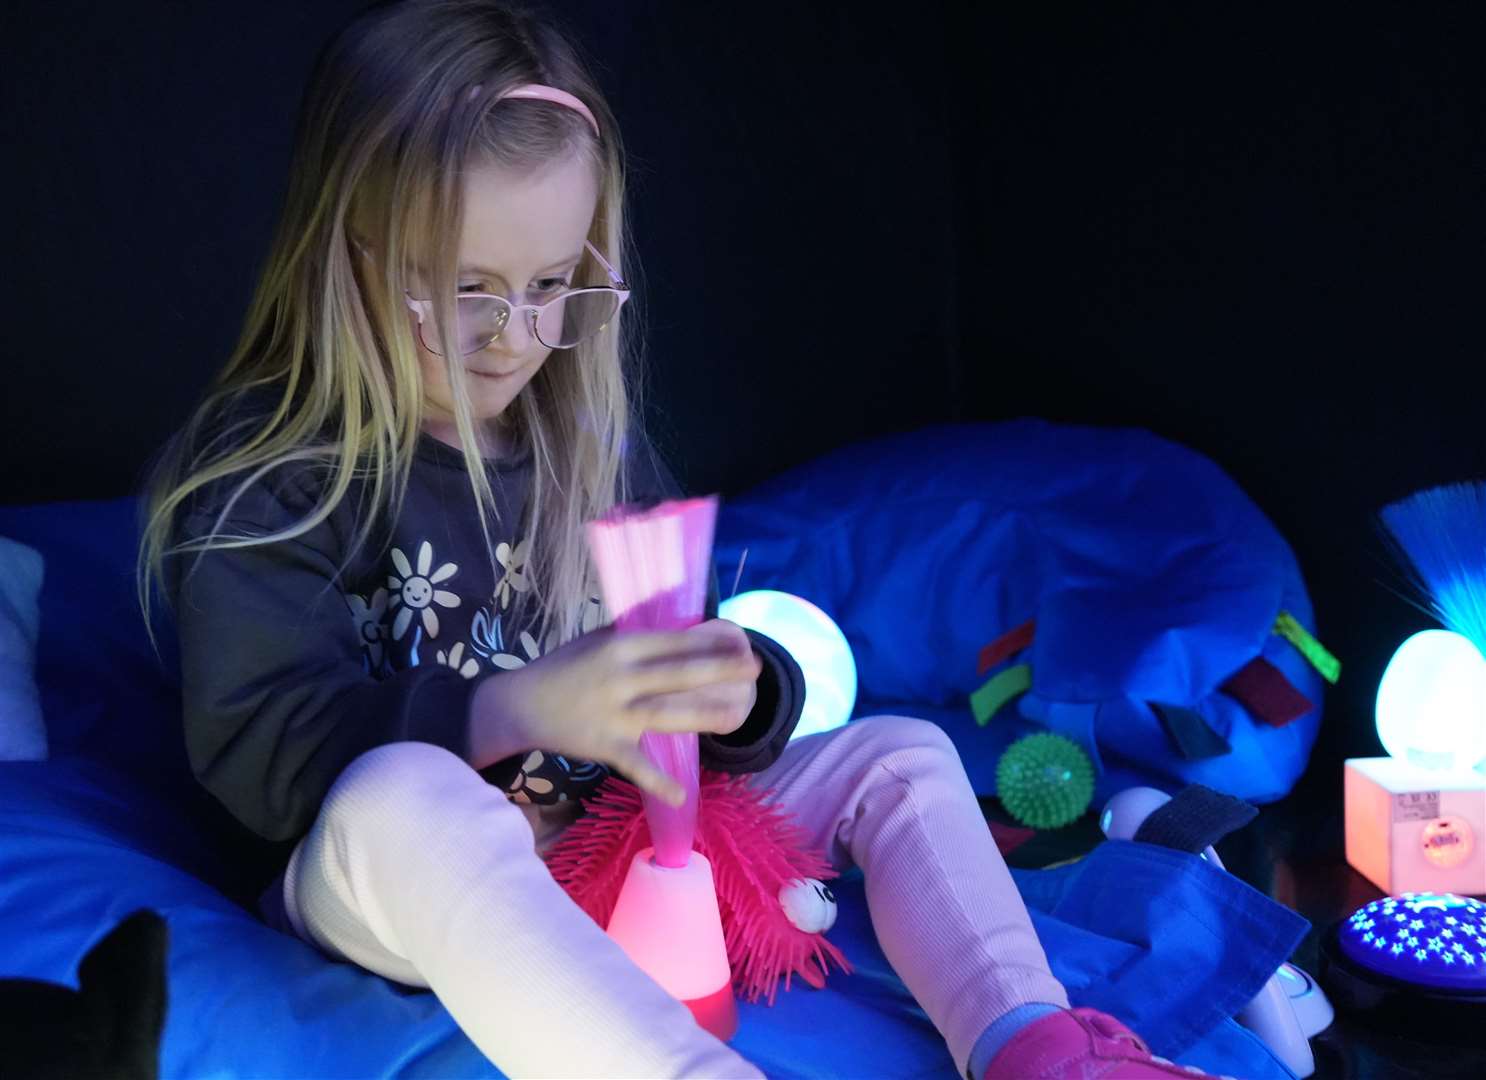 The new sensory room in use at Aberdeen